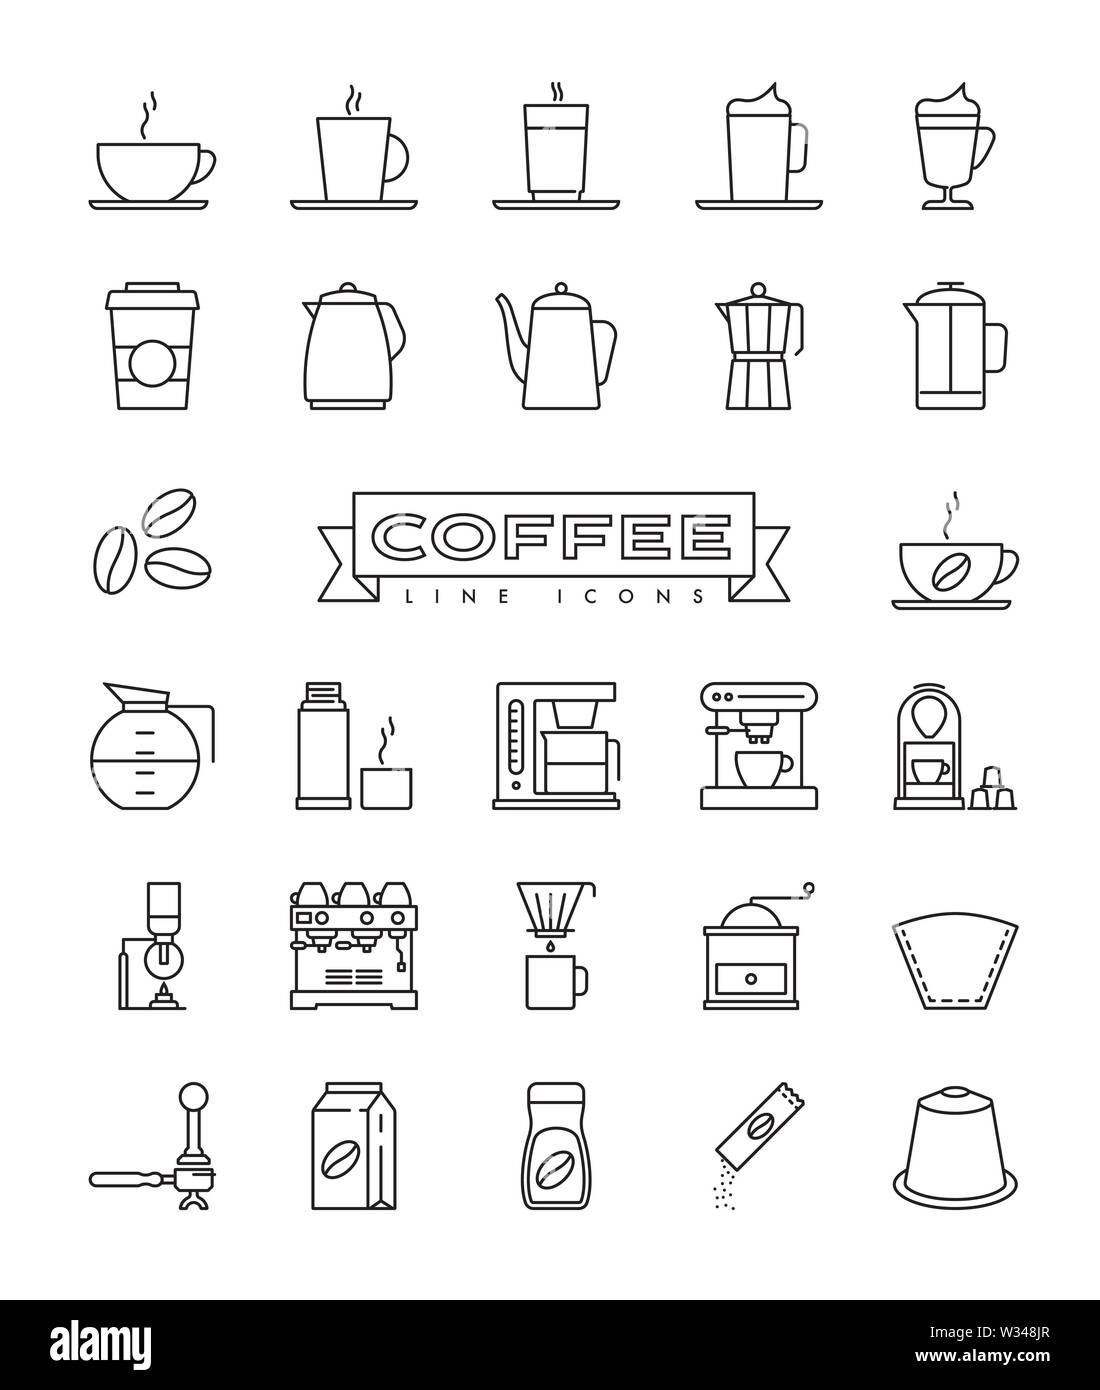 Coffee vector outline icons set. Collection of symbols related to coffee preparation and drinking. Stock Vector